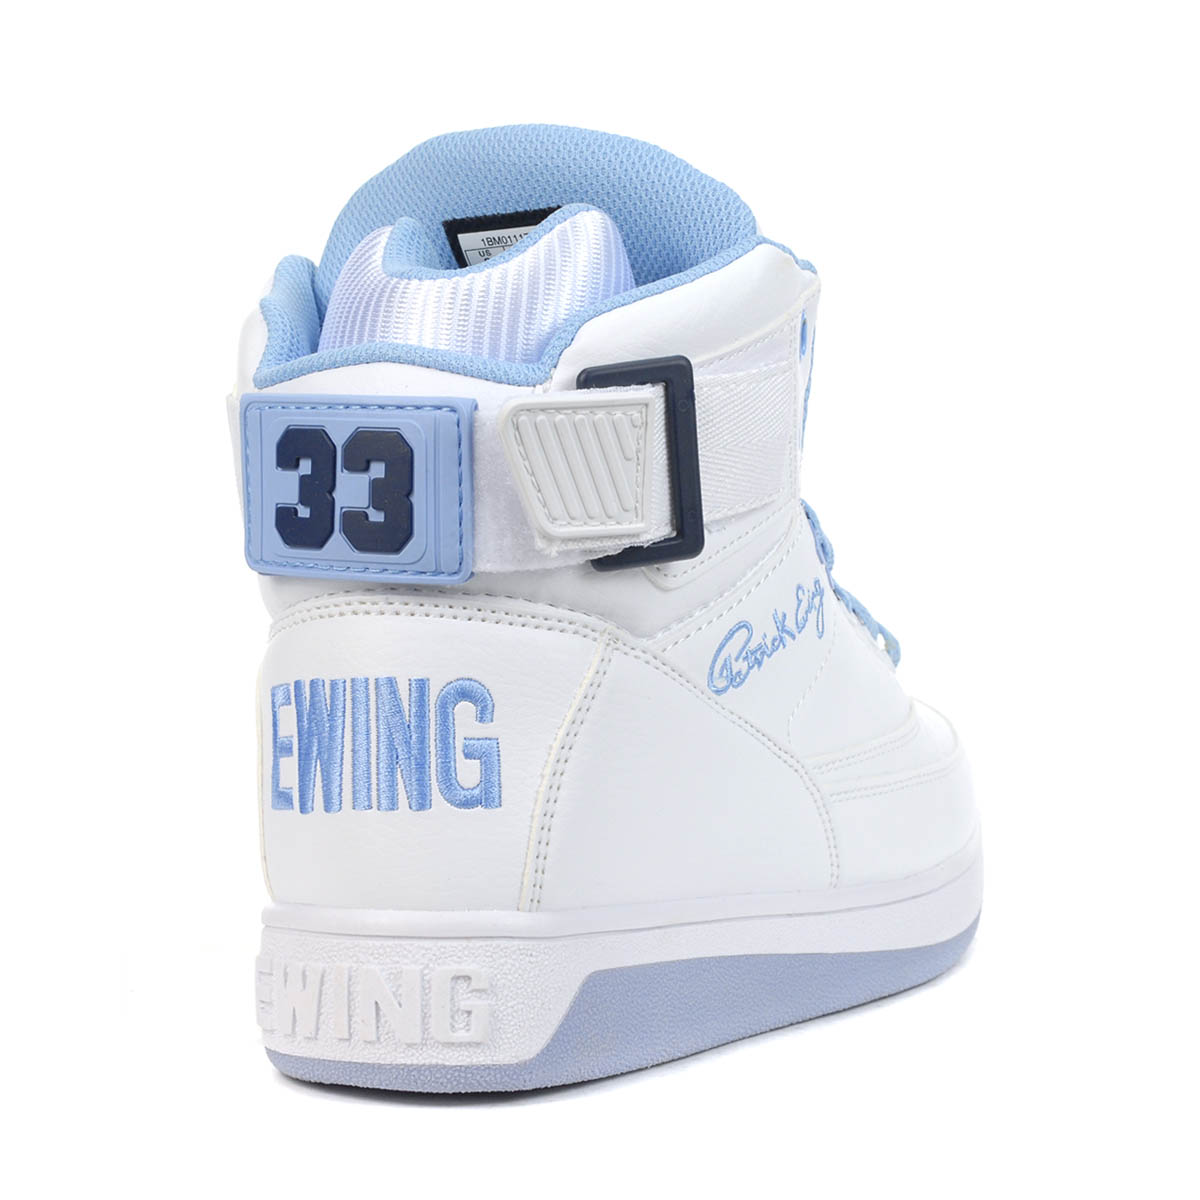 Ewing Athletics 33 HI x Orion White/Blue Bell Patrick Ewing Basketball Shoes  